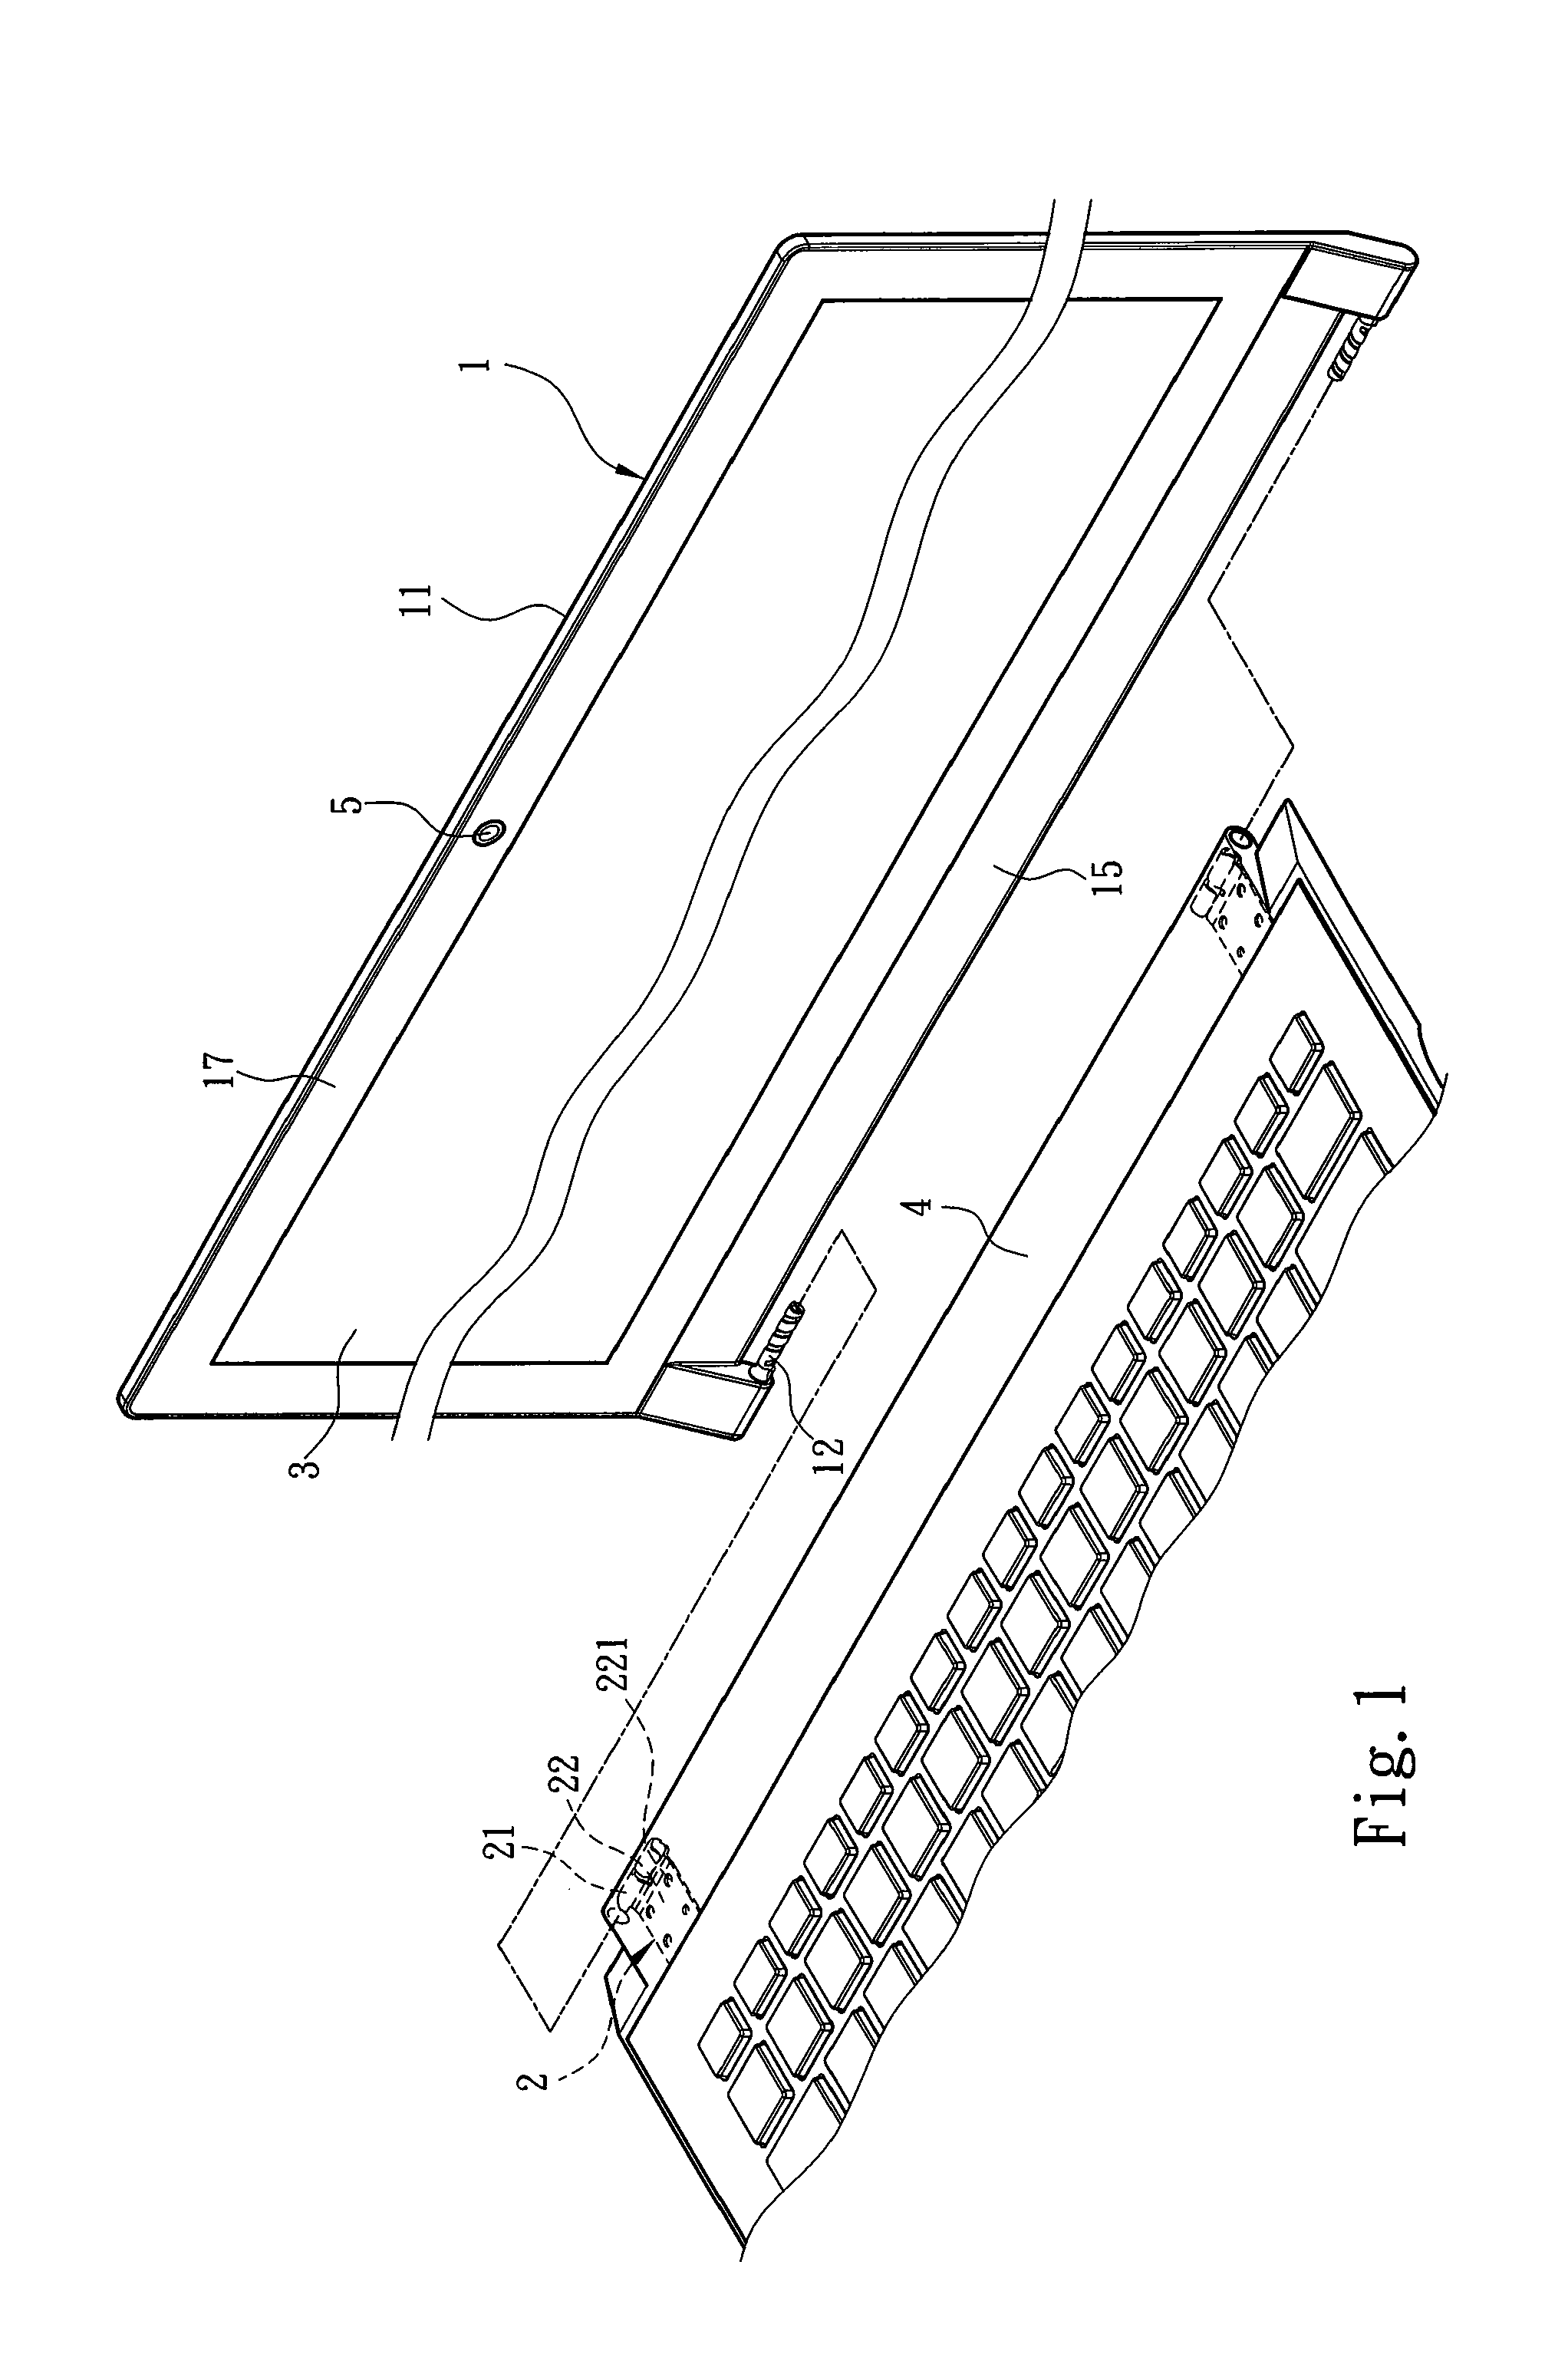 Hinge structure for assembly of a display module